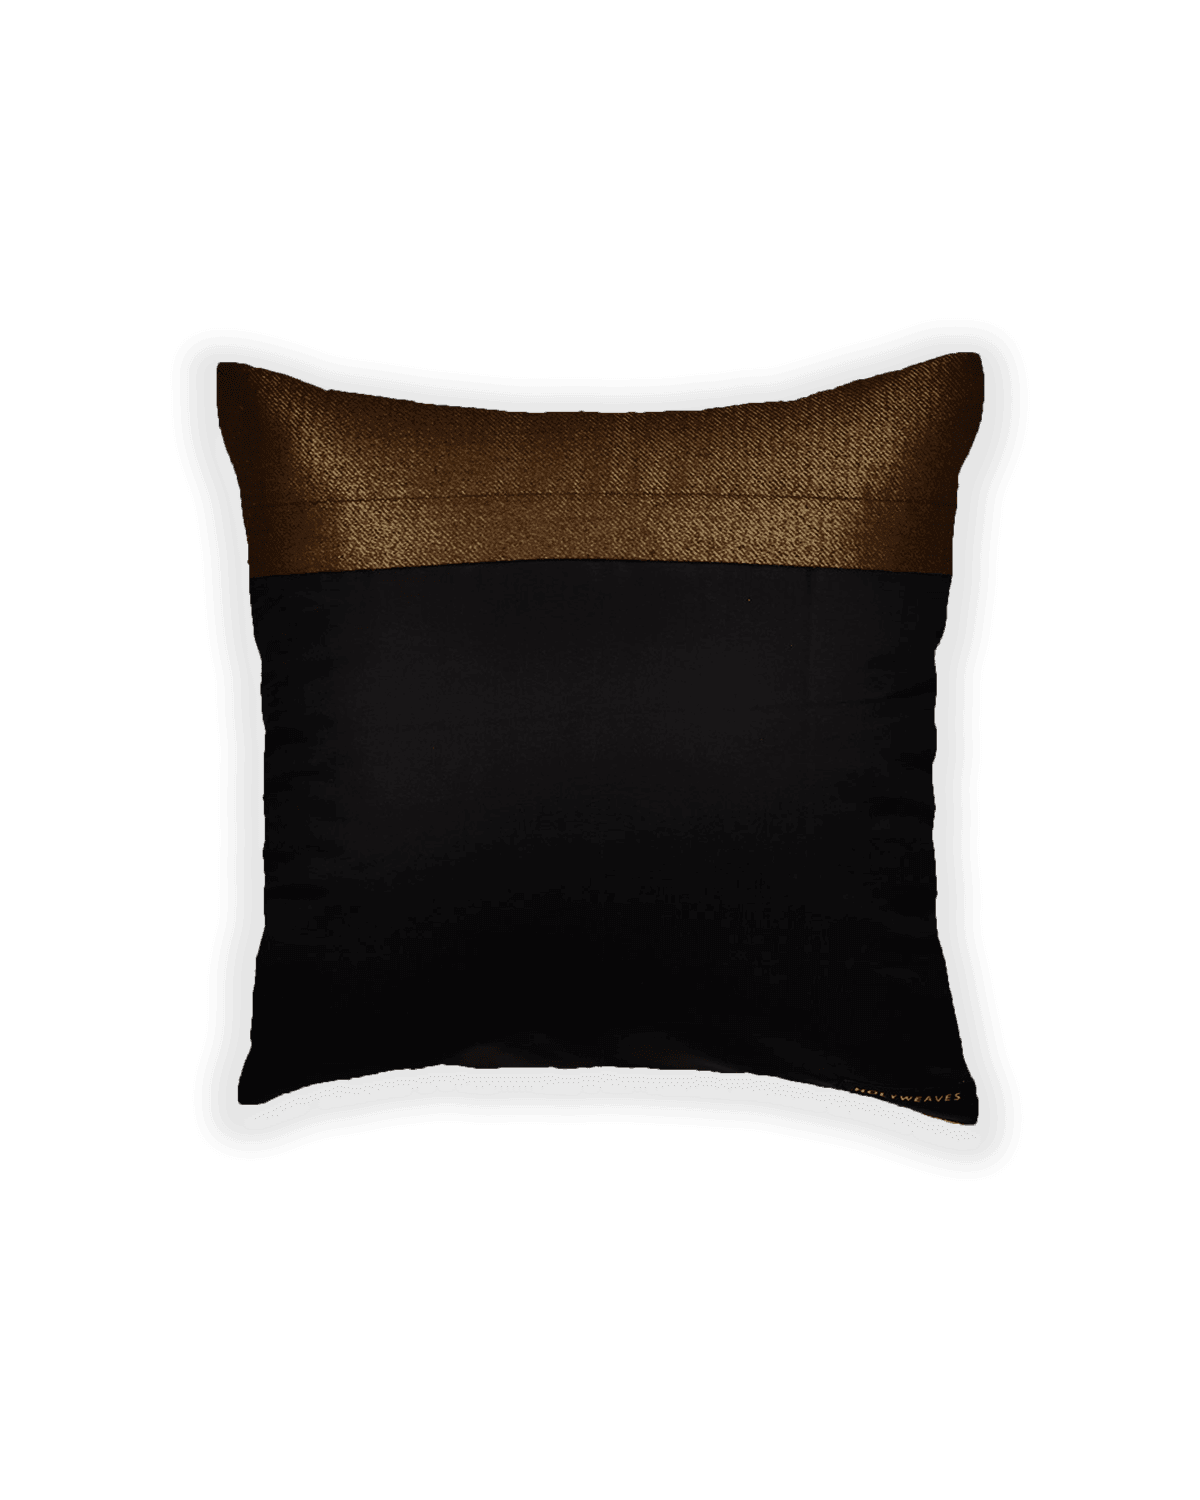 Metallic Brown Brocade Woven Noile Silk Cushion Cover with Satin Back 16" - By HolyWeaves, Benares